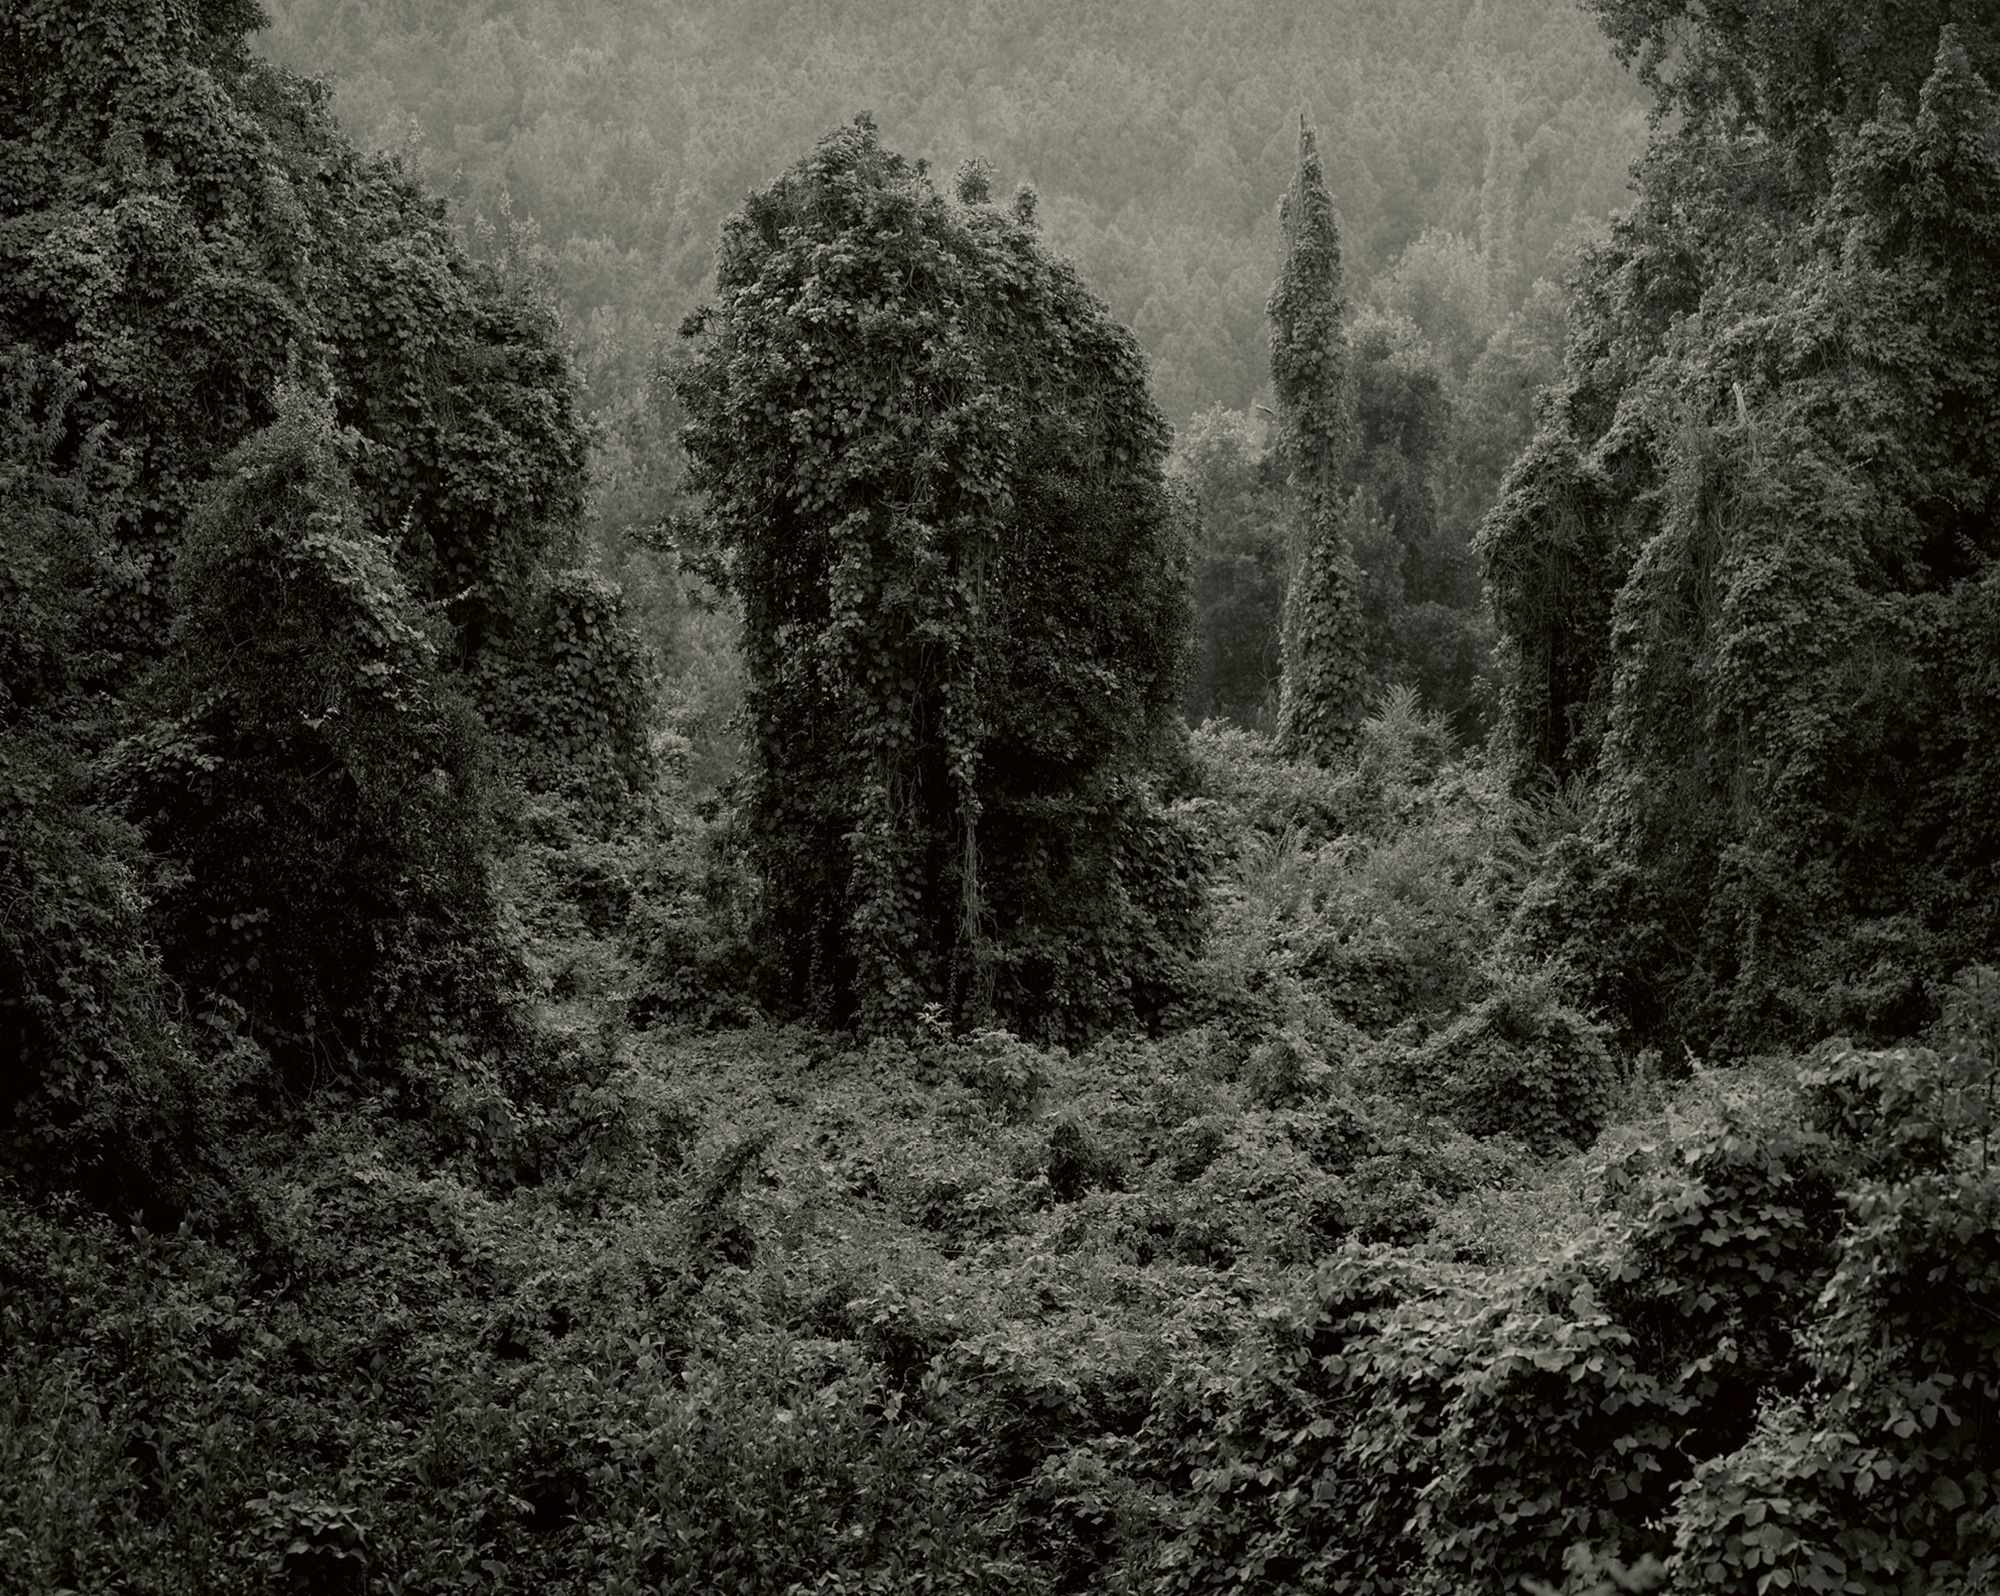 Helene Schmitz’s two thousand and twelve photograph depicting landscapes of the southeastern United States covered in kudzu.